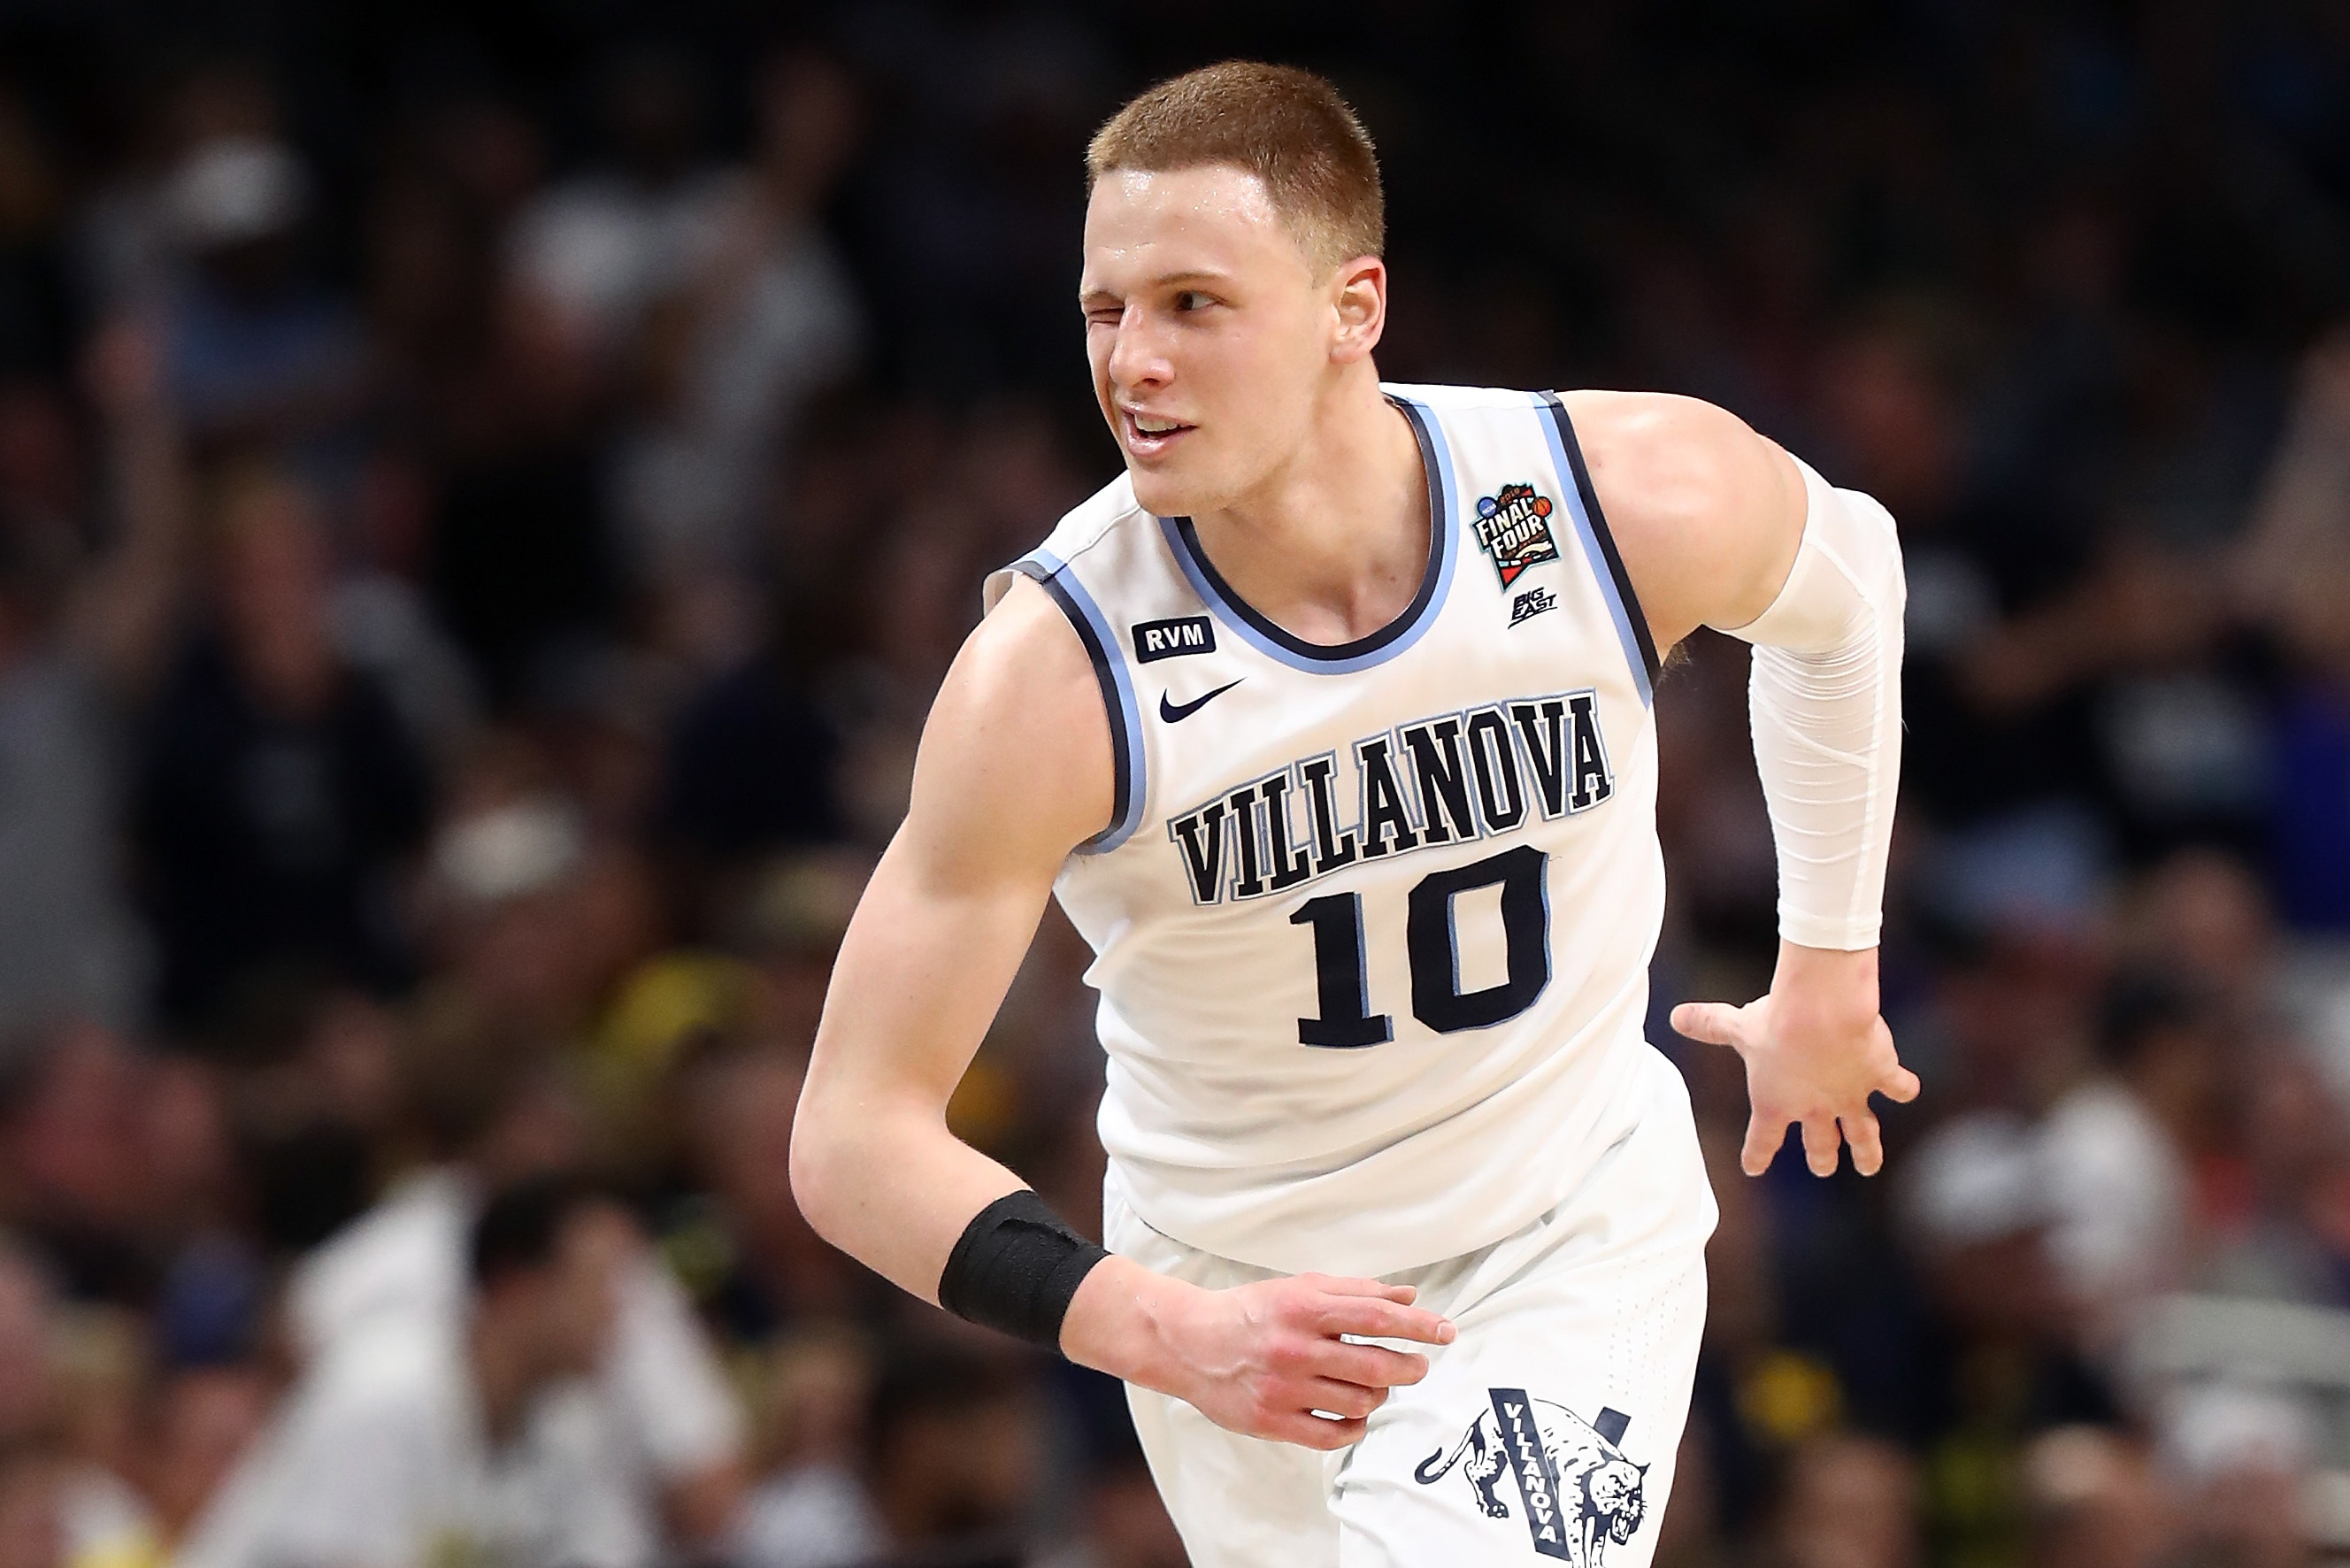 Delaware's Donte DiVincenzo to play for Knicks: Report